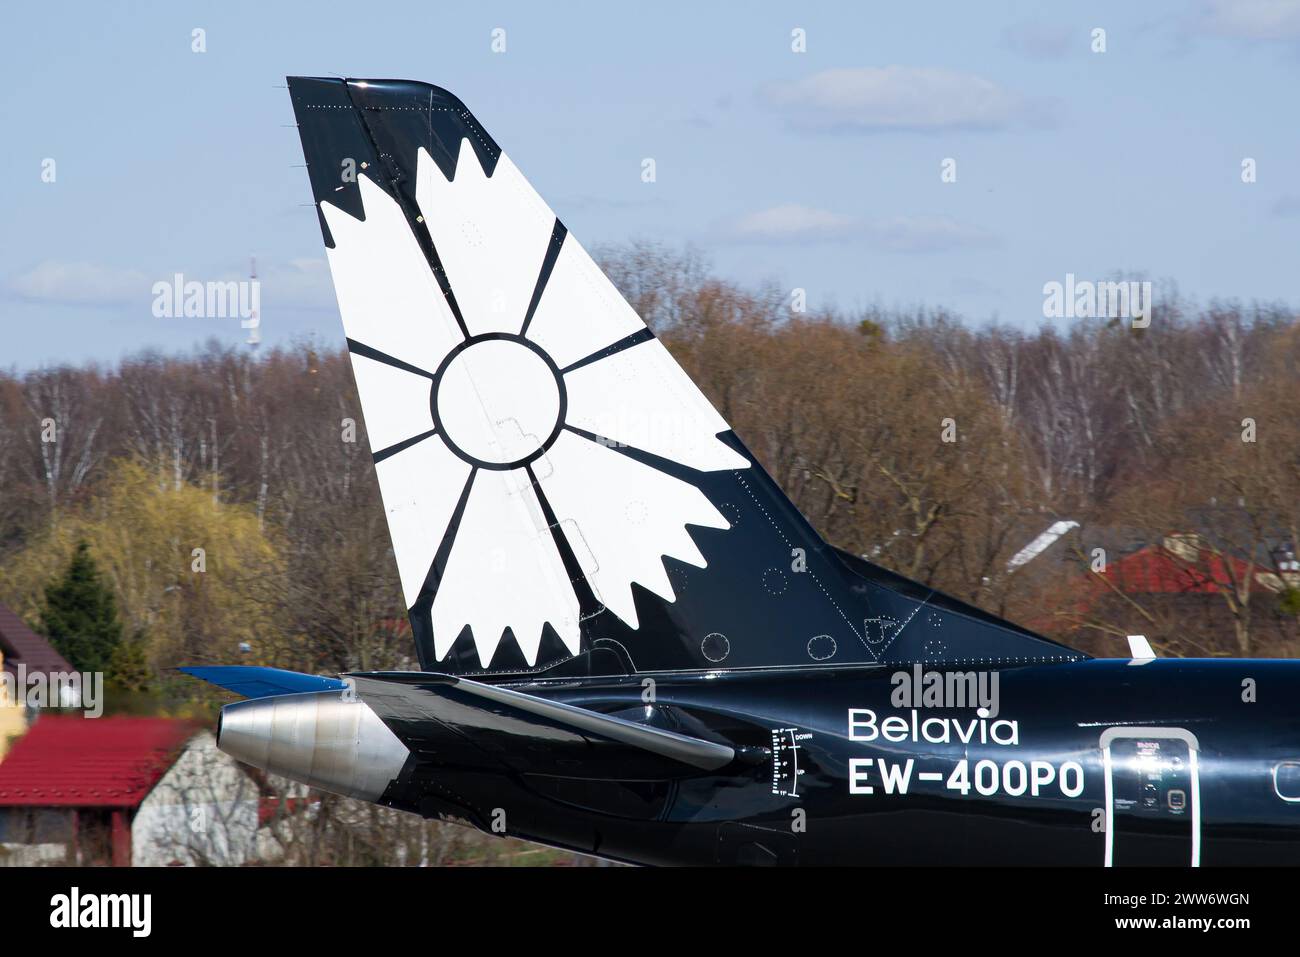 Vertical stabilizer close-up of a Belavia Embraer E195 in special 'World of Tanks' livery taxiing for takeoff at Lviv Airport Stock Photo